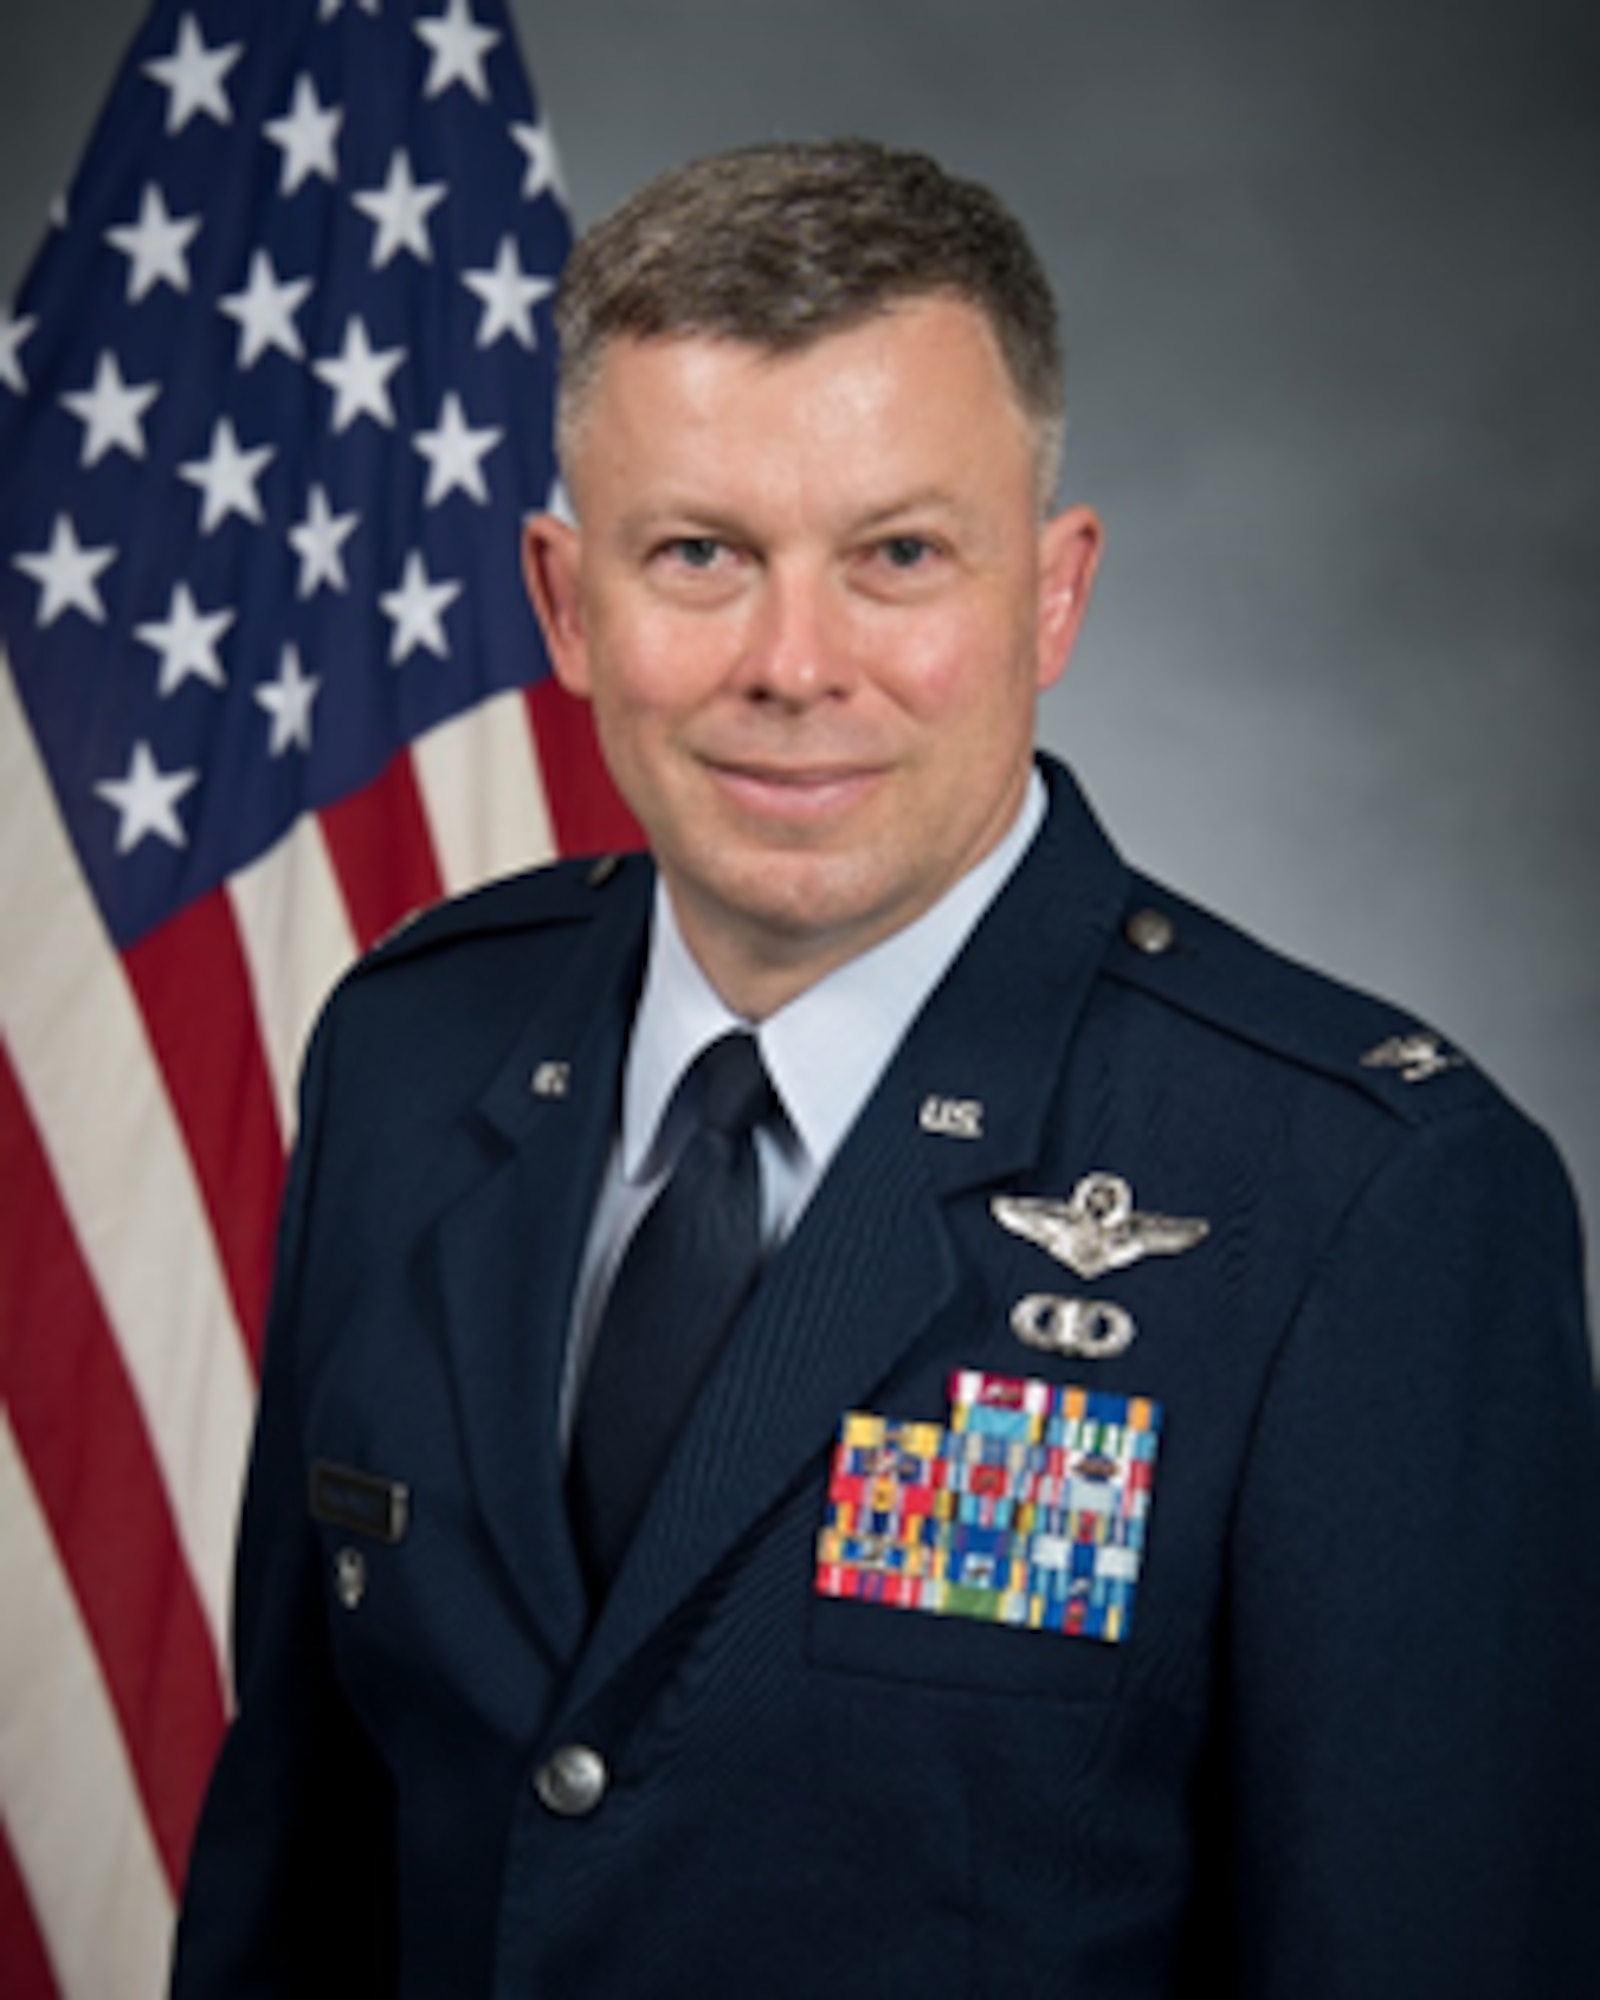 Colonel Johnny R. McGonigal took charge as the director of Air Force Junior Officer Training Corps, Maxwell Air Force Base, Ala., on July 1, 2021. Air Force JROTC comprises almost 125,000 high school and eighth grade students and approximately 1,900 retired officer and senior non-commissioned officer instructors at about 880 high schools in the United States, Europe, Asia and Puerto Rico.